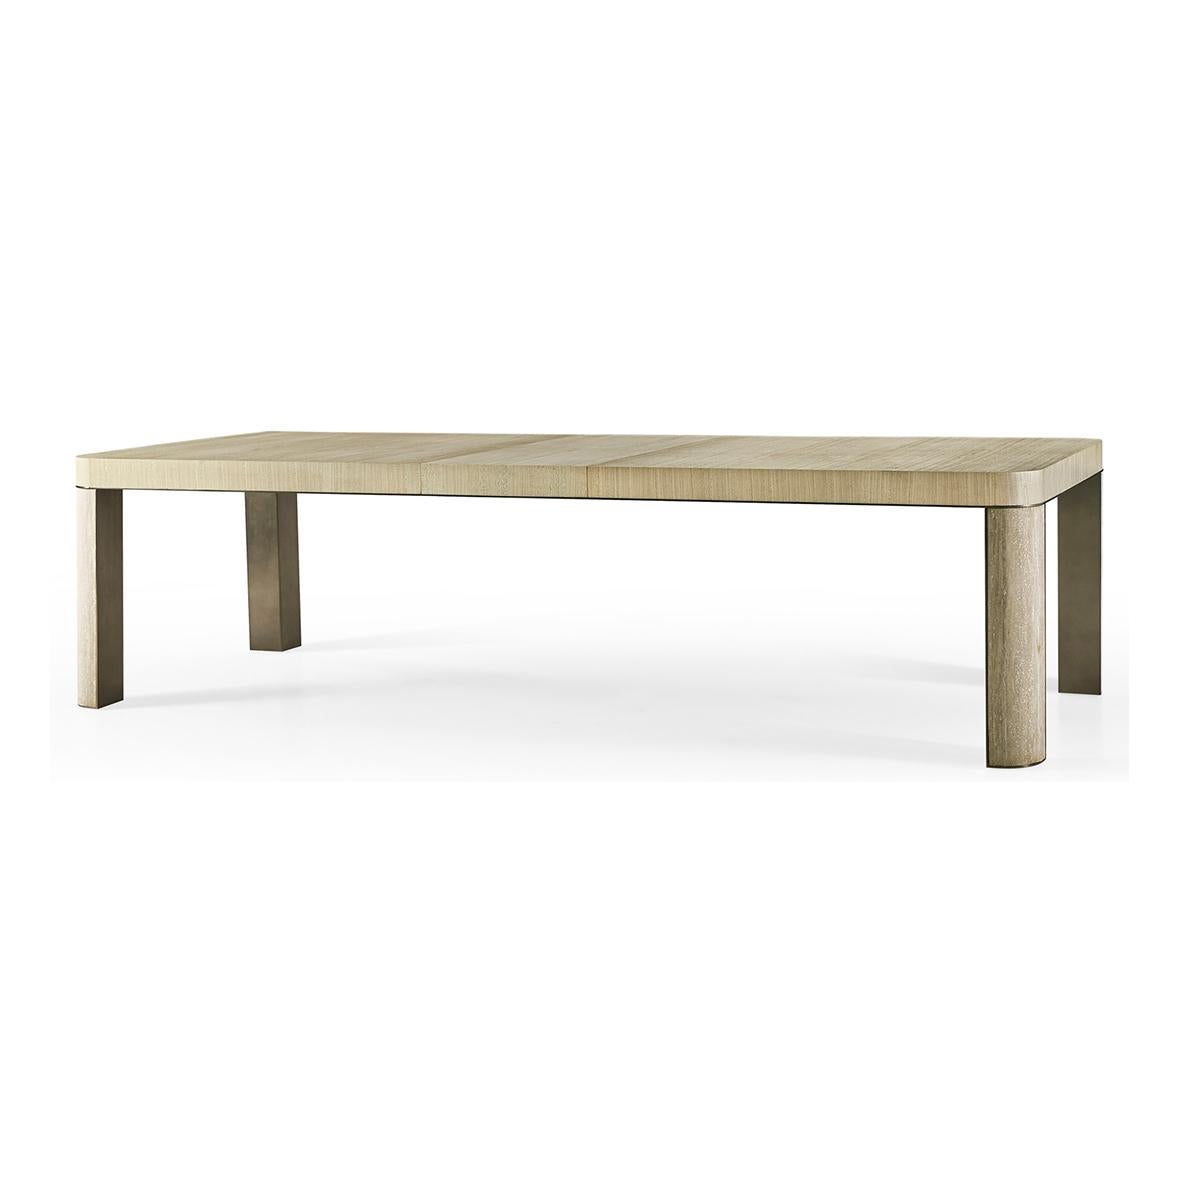 Modern Travertine Leg Extension dining table, featuring classic forms and clean lines, the travertine leg dining table is honed from time-tested beautiful natural stone. Travertine corner legs are embellished with a stainless steel edge banding in